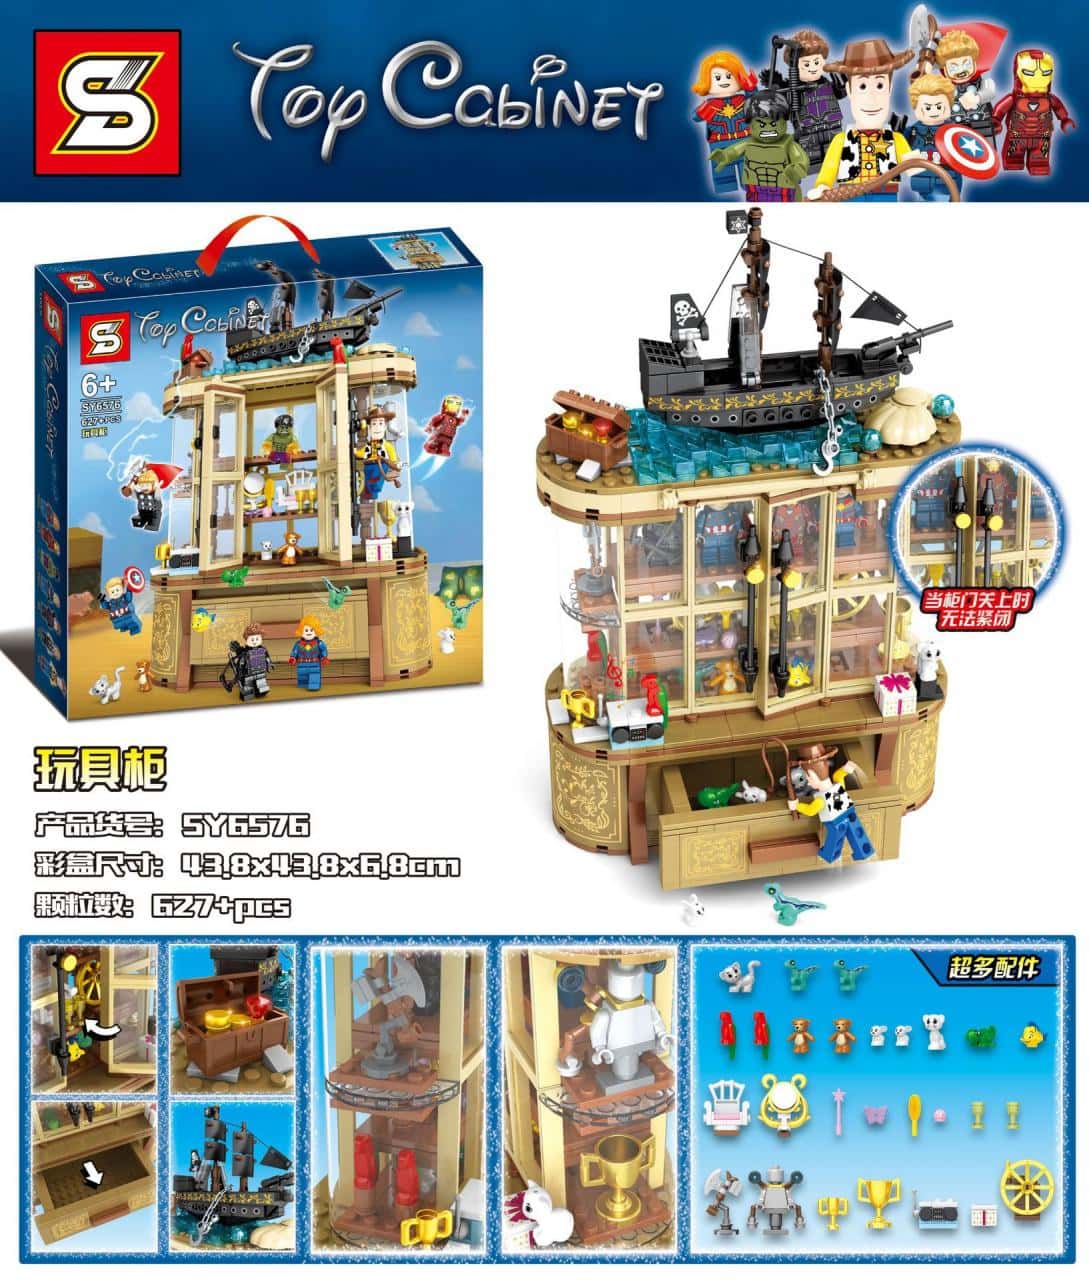 sy 6576 toy cabinet toys story 4 movie 3870 - LEPIN Germany